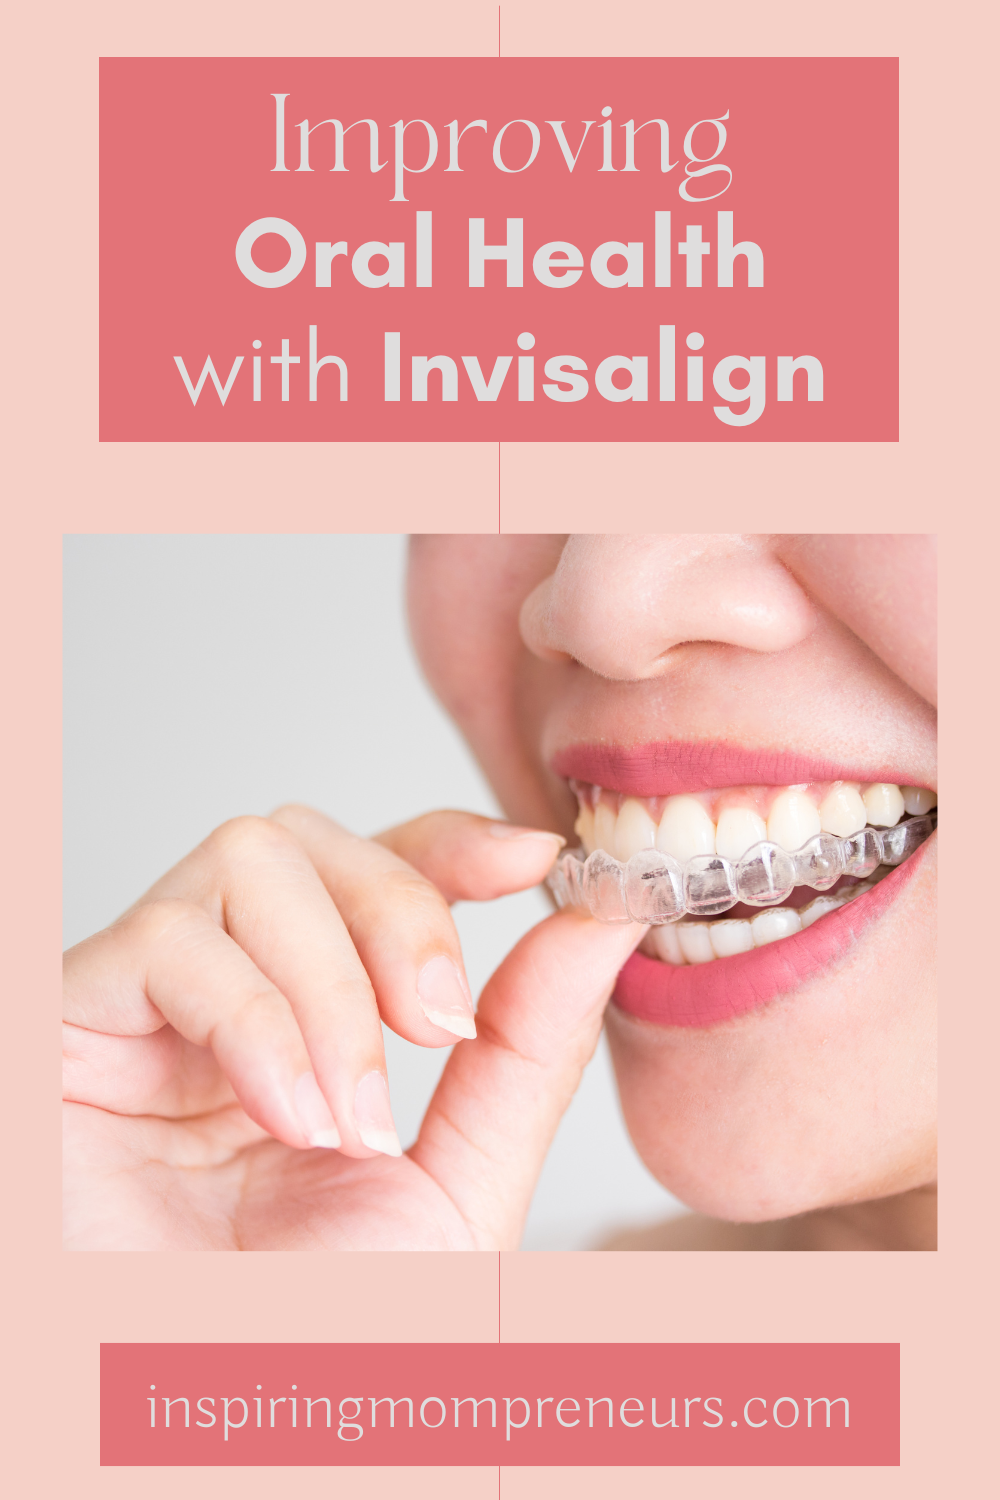 The main negative effect of crooked teeth is that they result in sub-standard oral hygiene. That's why we see patients improving oral health with Invisalign.